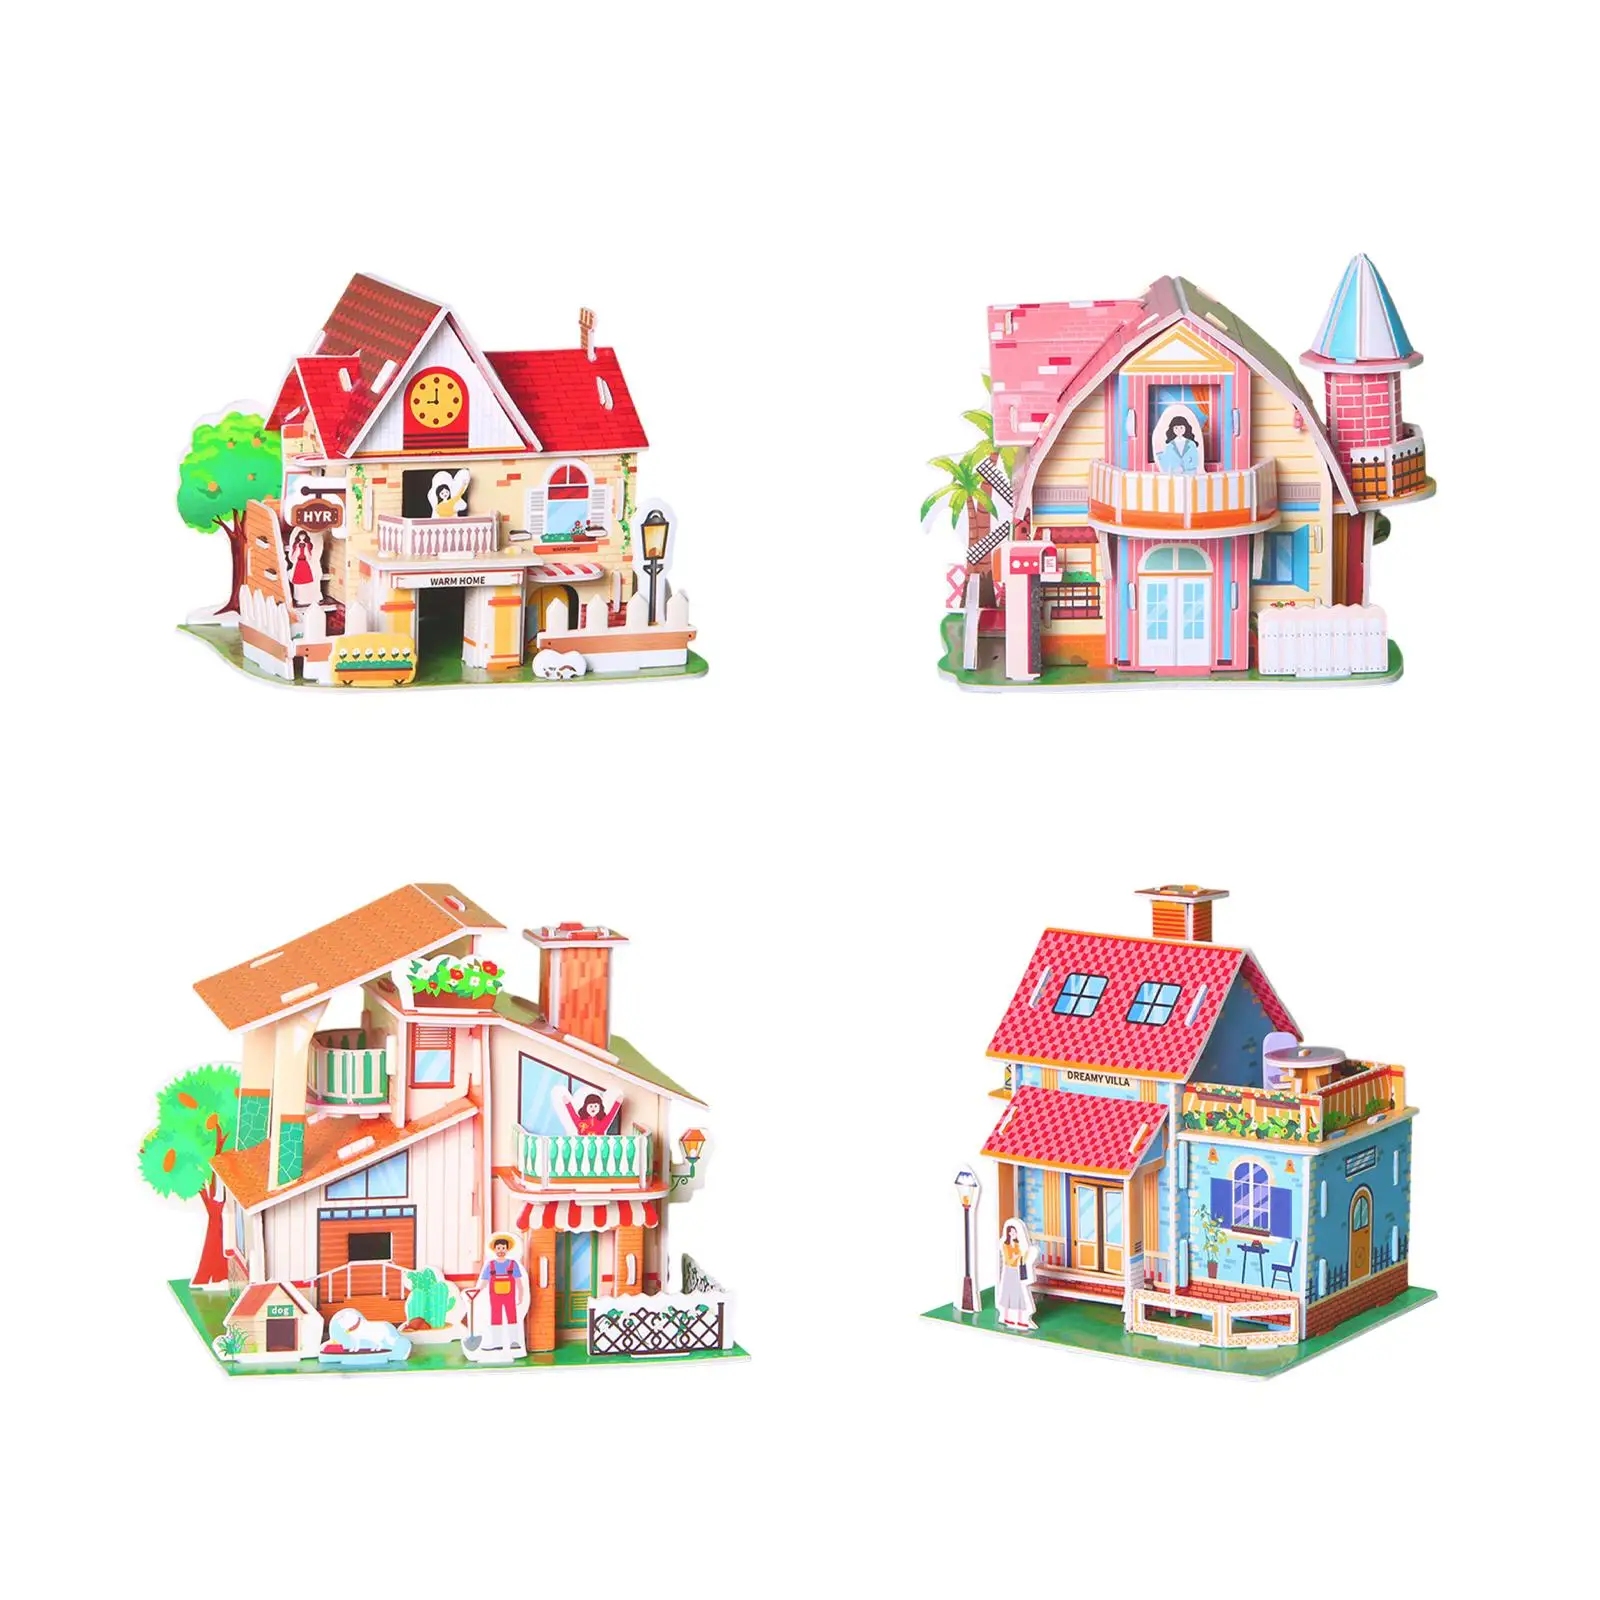 DIY 3D Puzzle Toys Hut Buildings for Adults Kids Birthday Gift Ornament